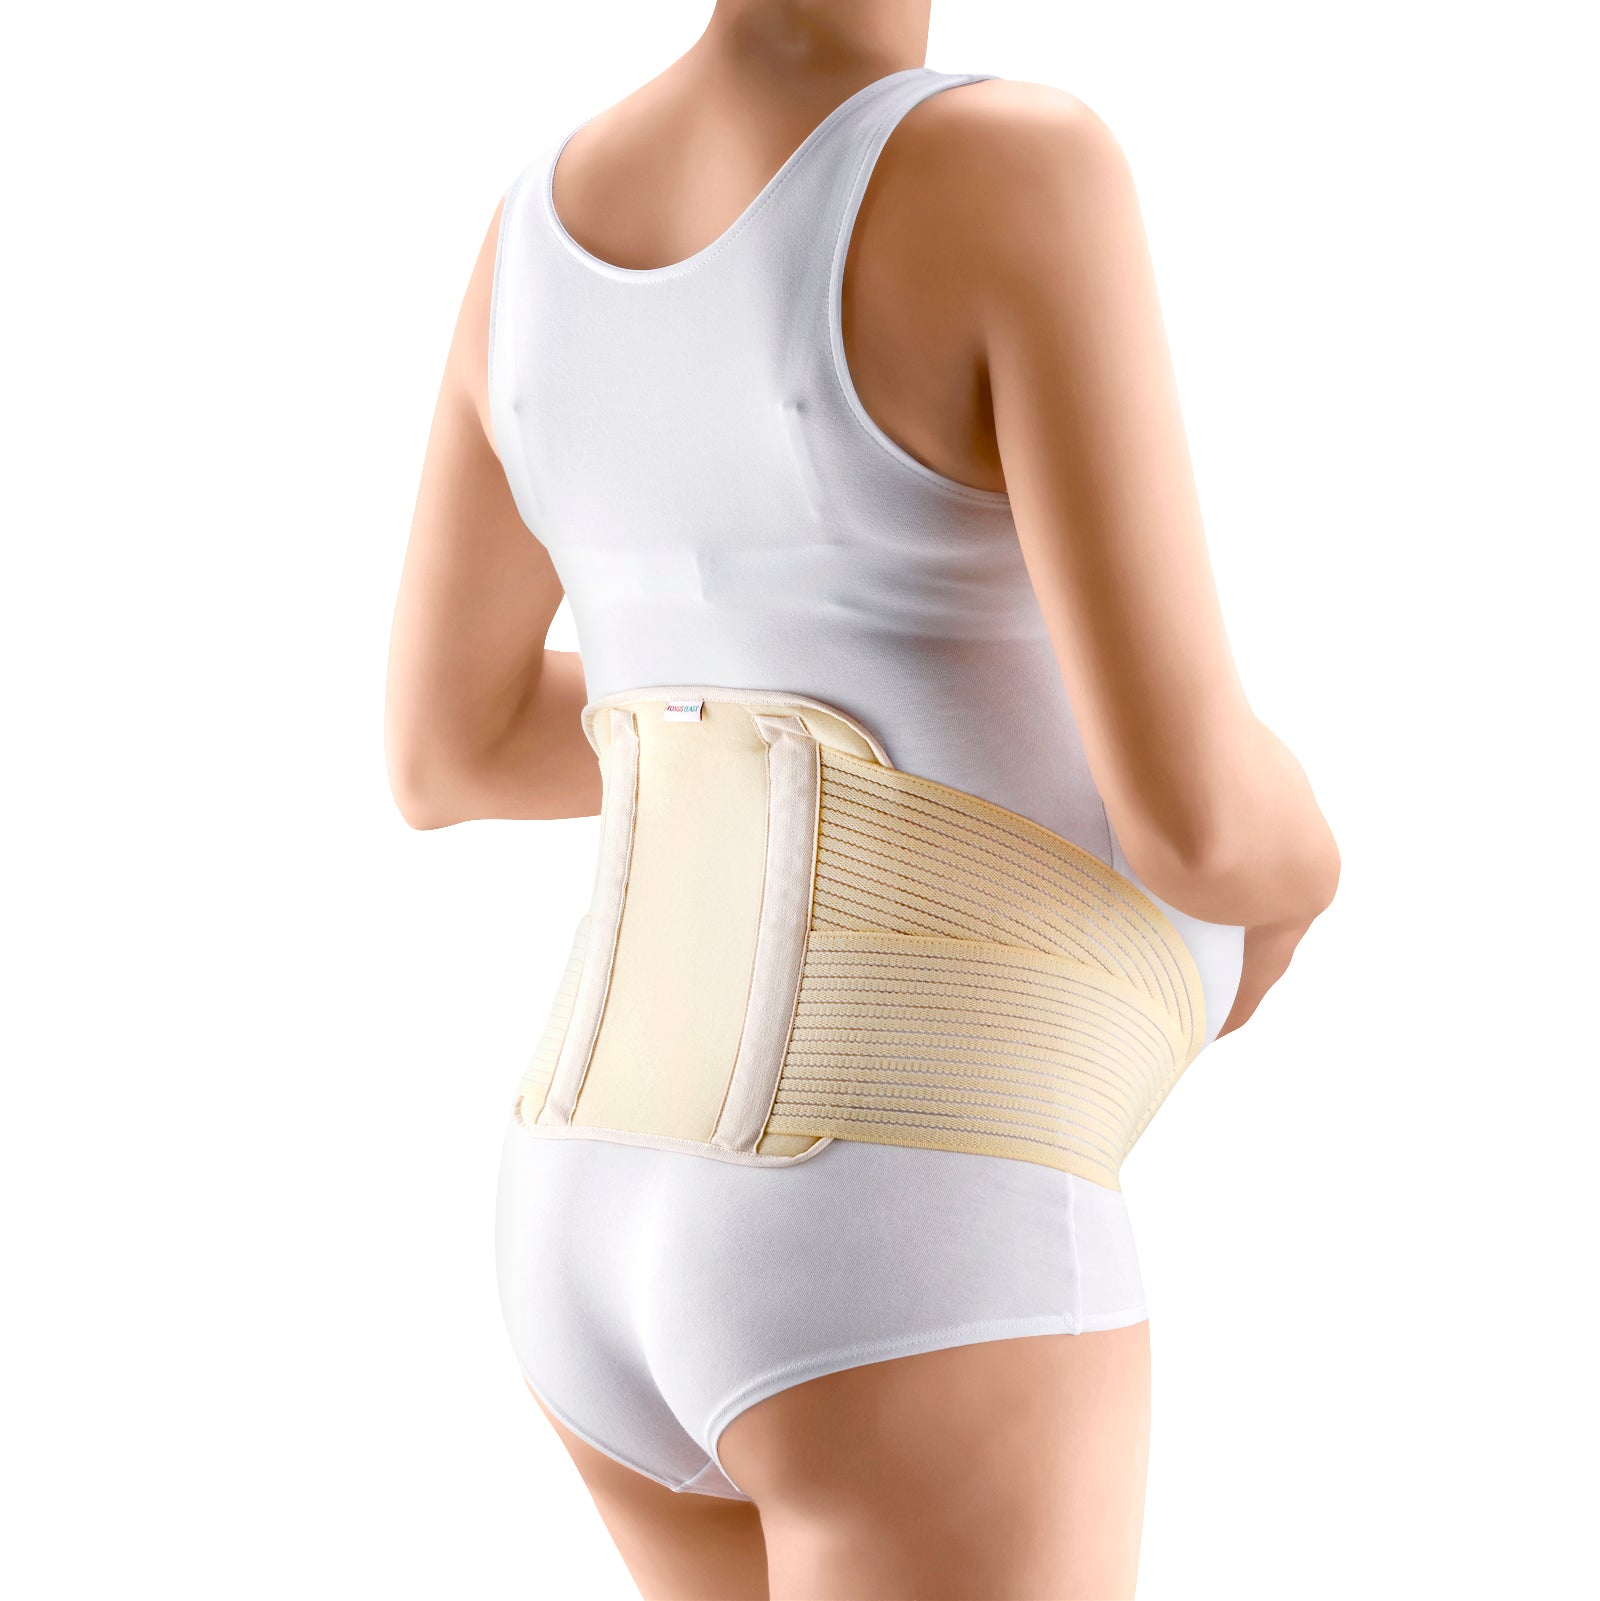 Corsets For Back Injury Recovery & Long-Term Support